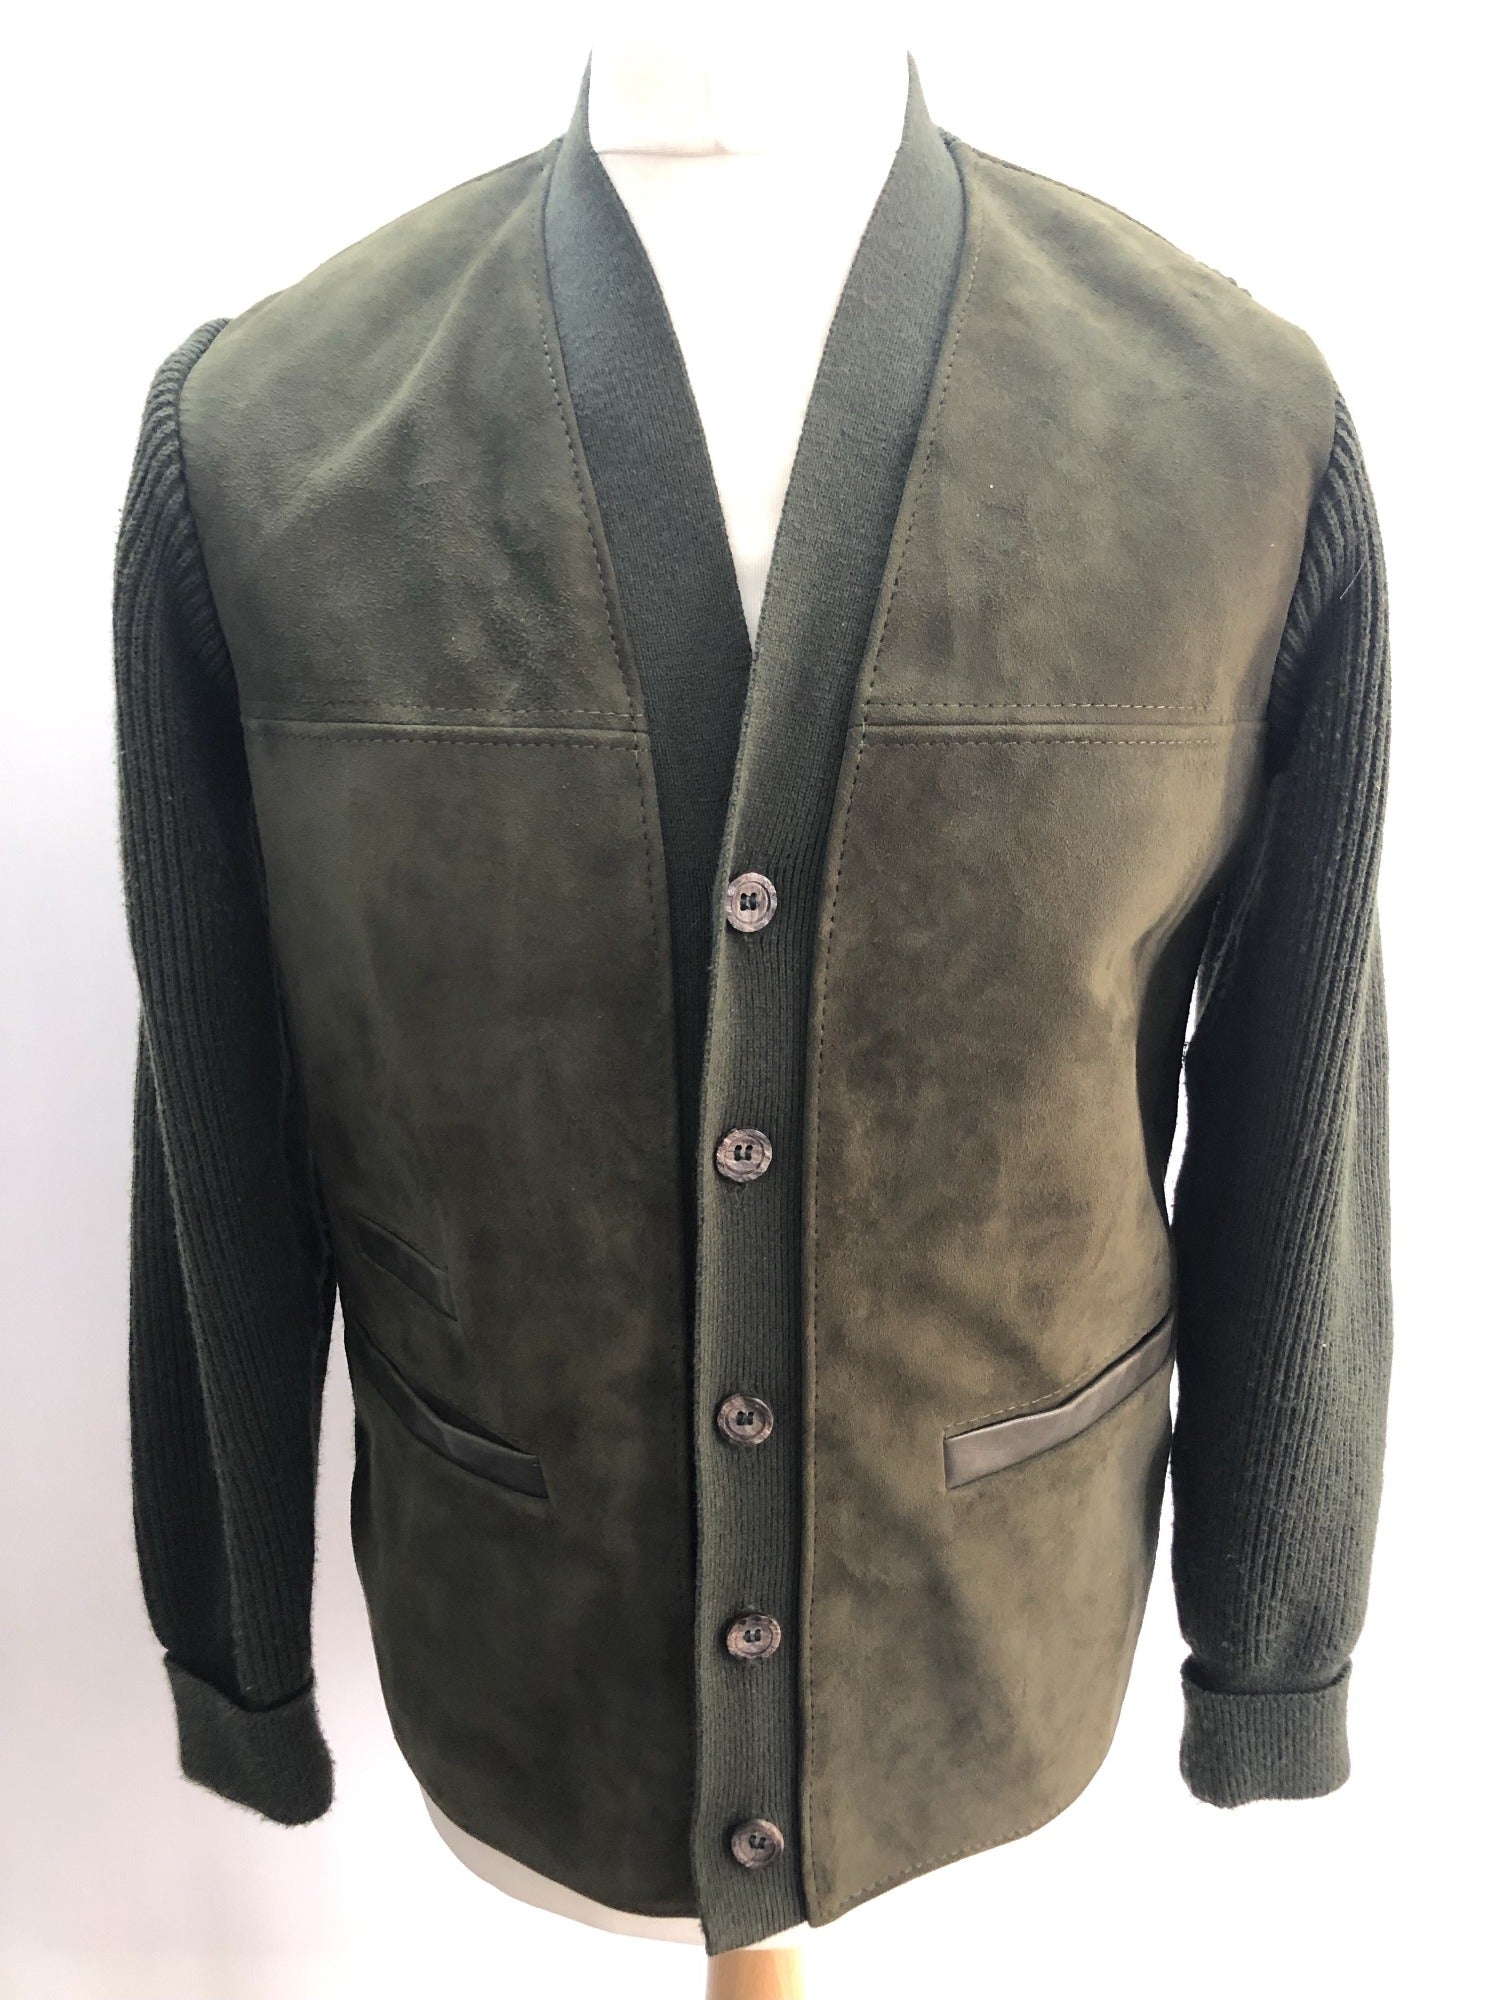 Urban Village Vintage  urban village  suede  s  pockets  mens  Mayborne of Bournemouth  long sleeve  knitted  knit  Green  front pockets  cardigan  cardi  60s  1960s